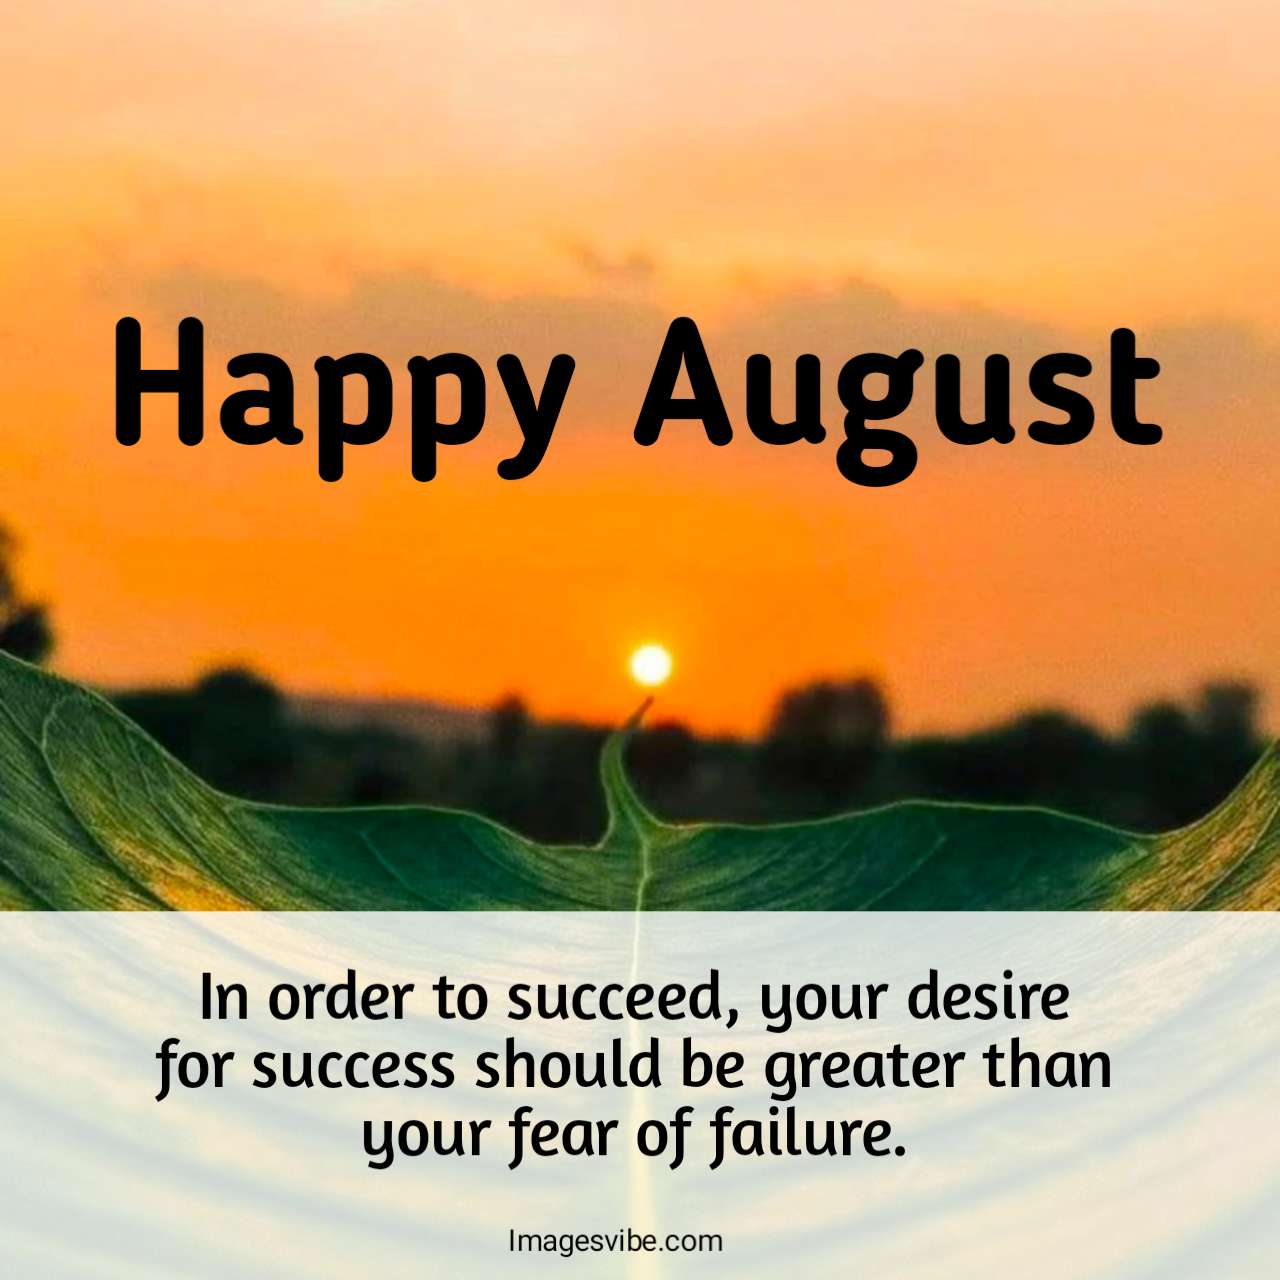 august quotes